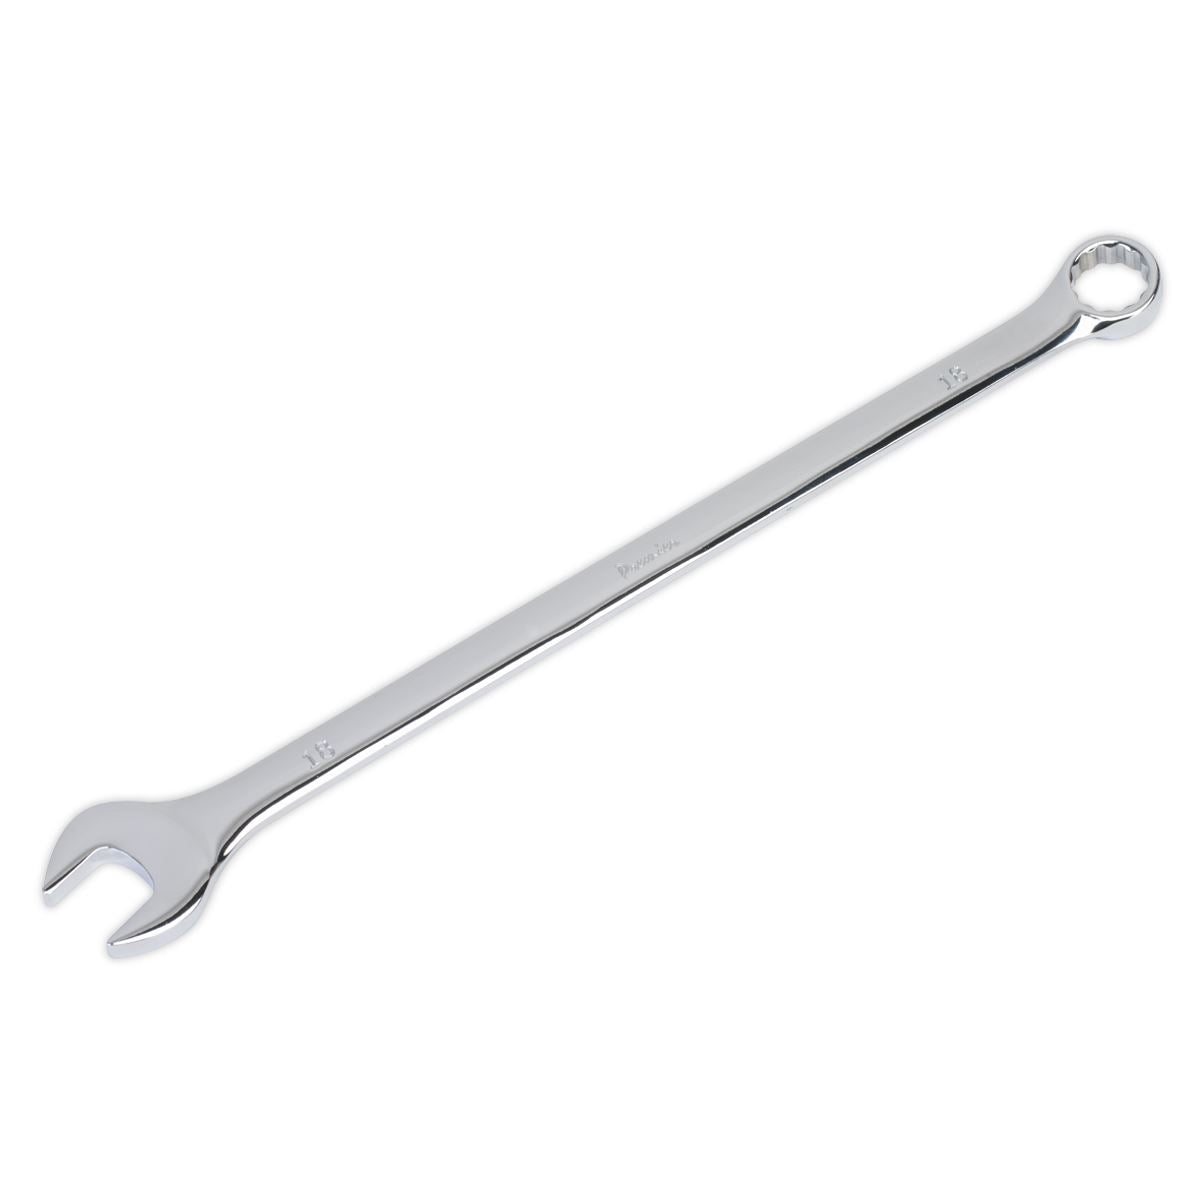 Sealey Combination Spanner Extra-Long 18mm Premier WallDrive Wrench Garage Tool